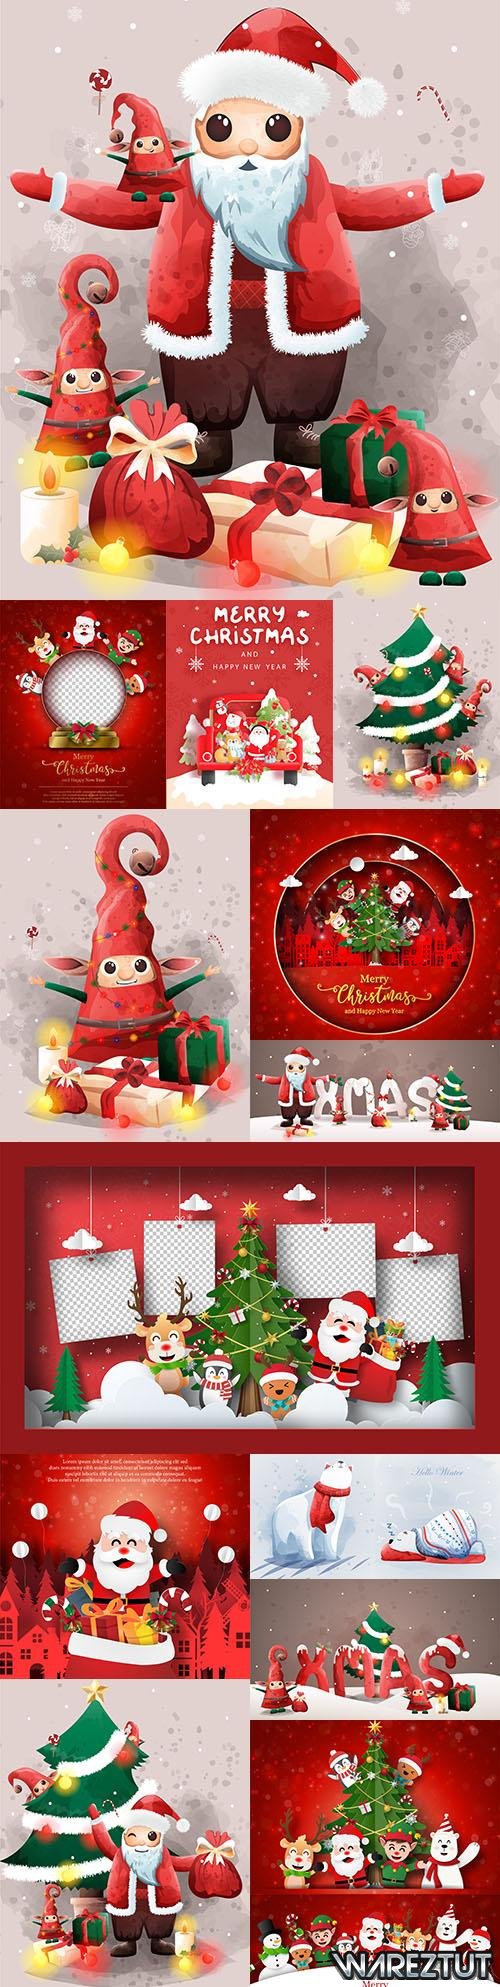 Santa Claus and cute elf Christmas Eve friends with gifts